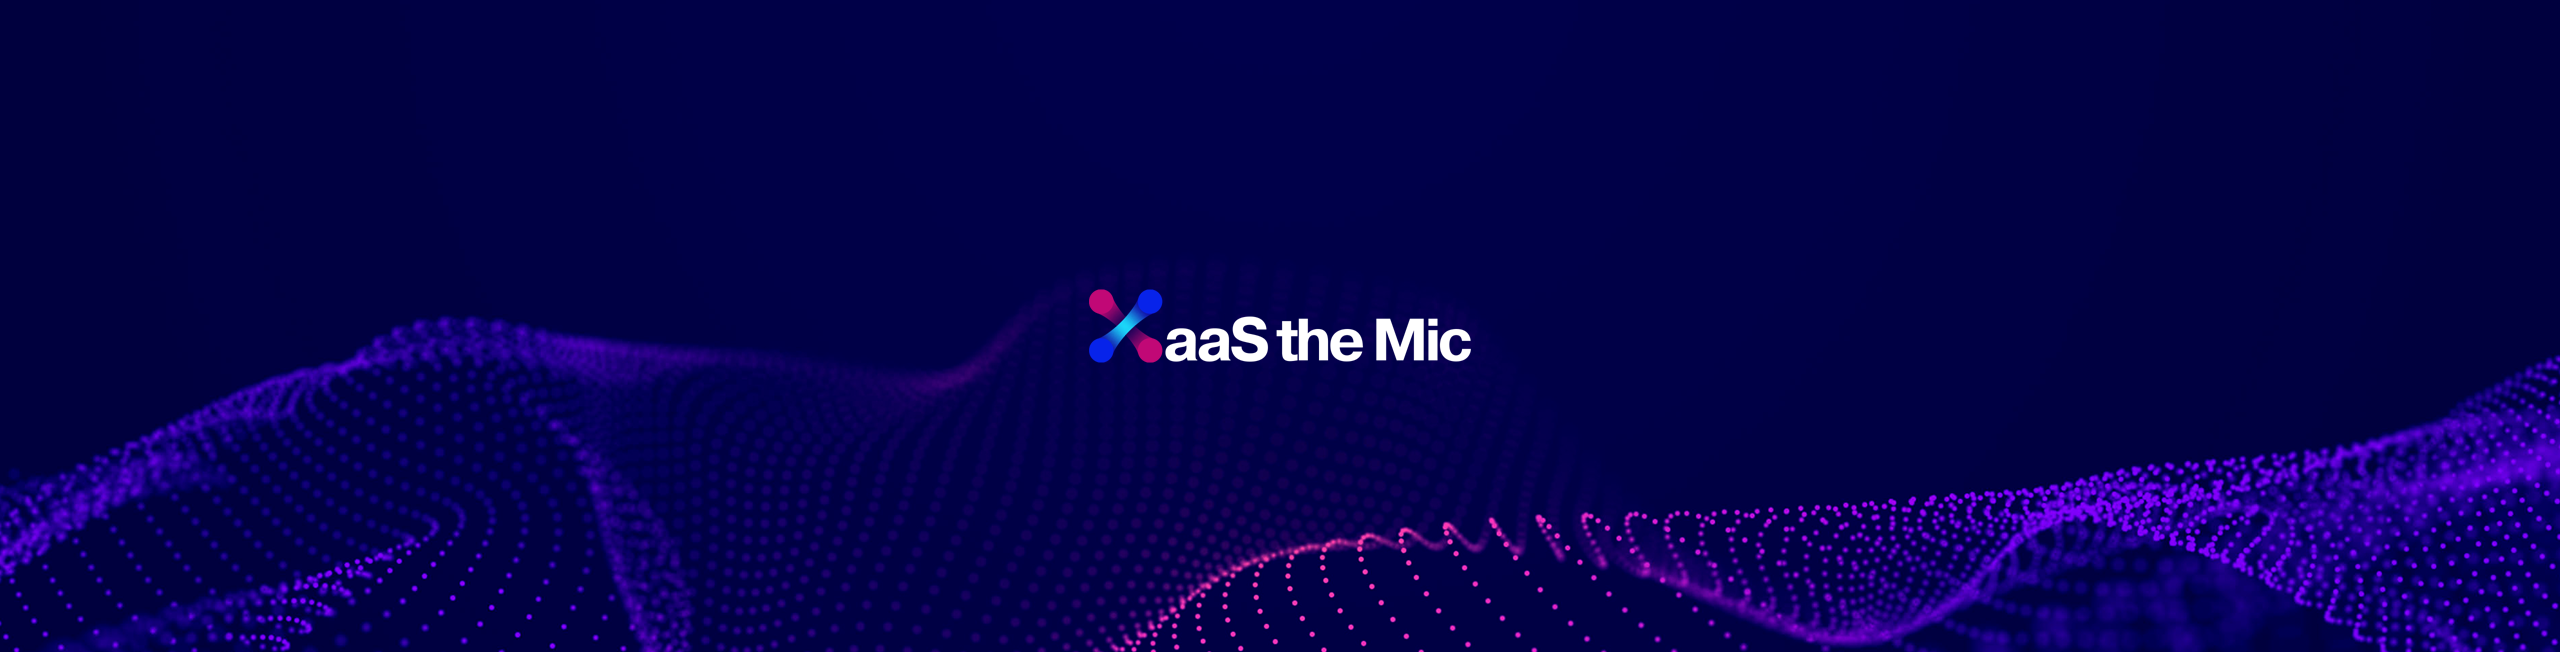 XaaS the Mic: The Golden Age of SaaS